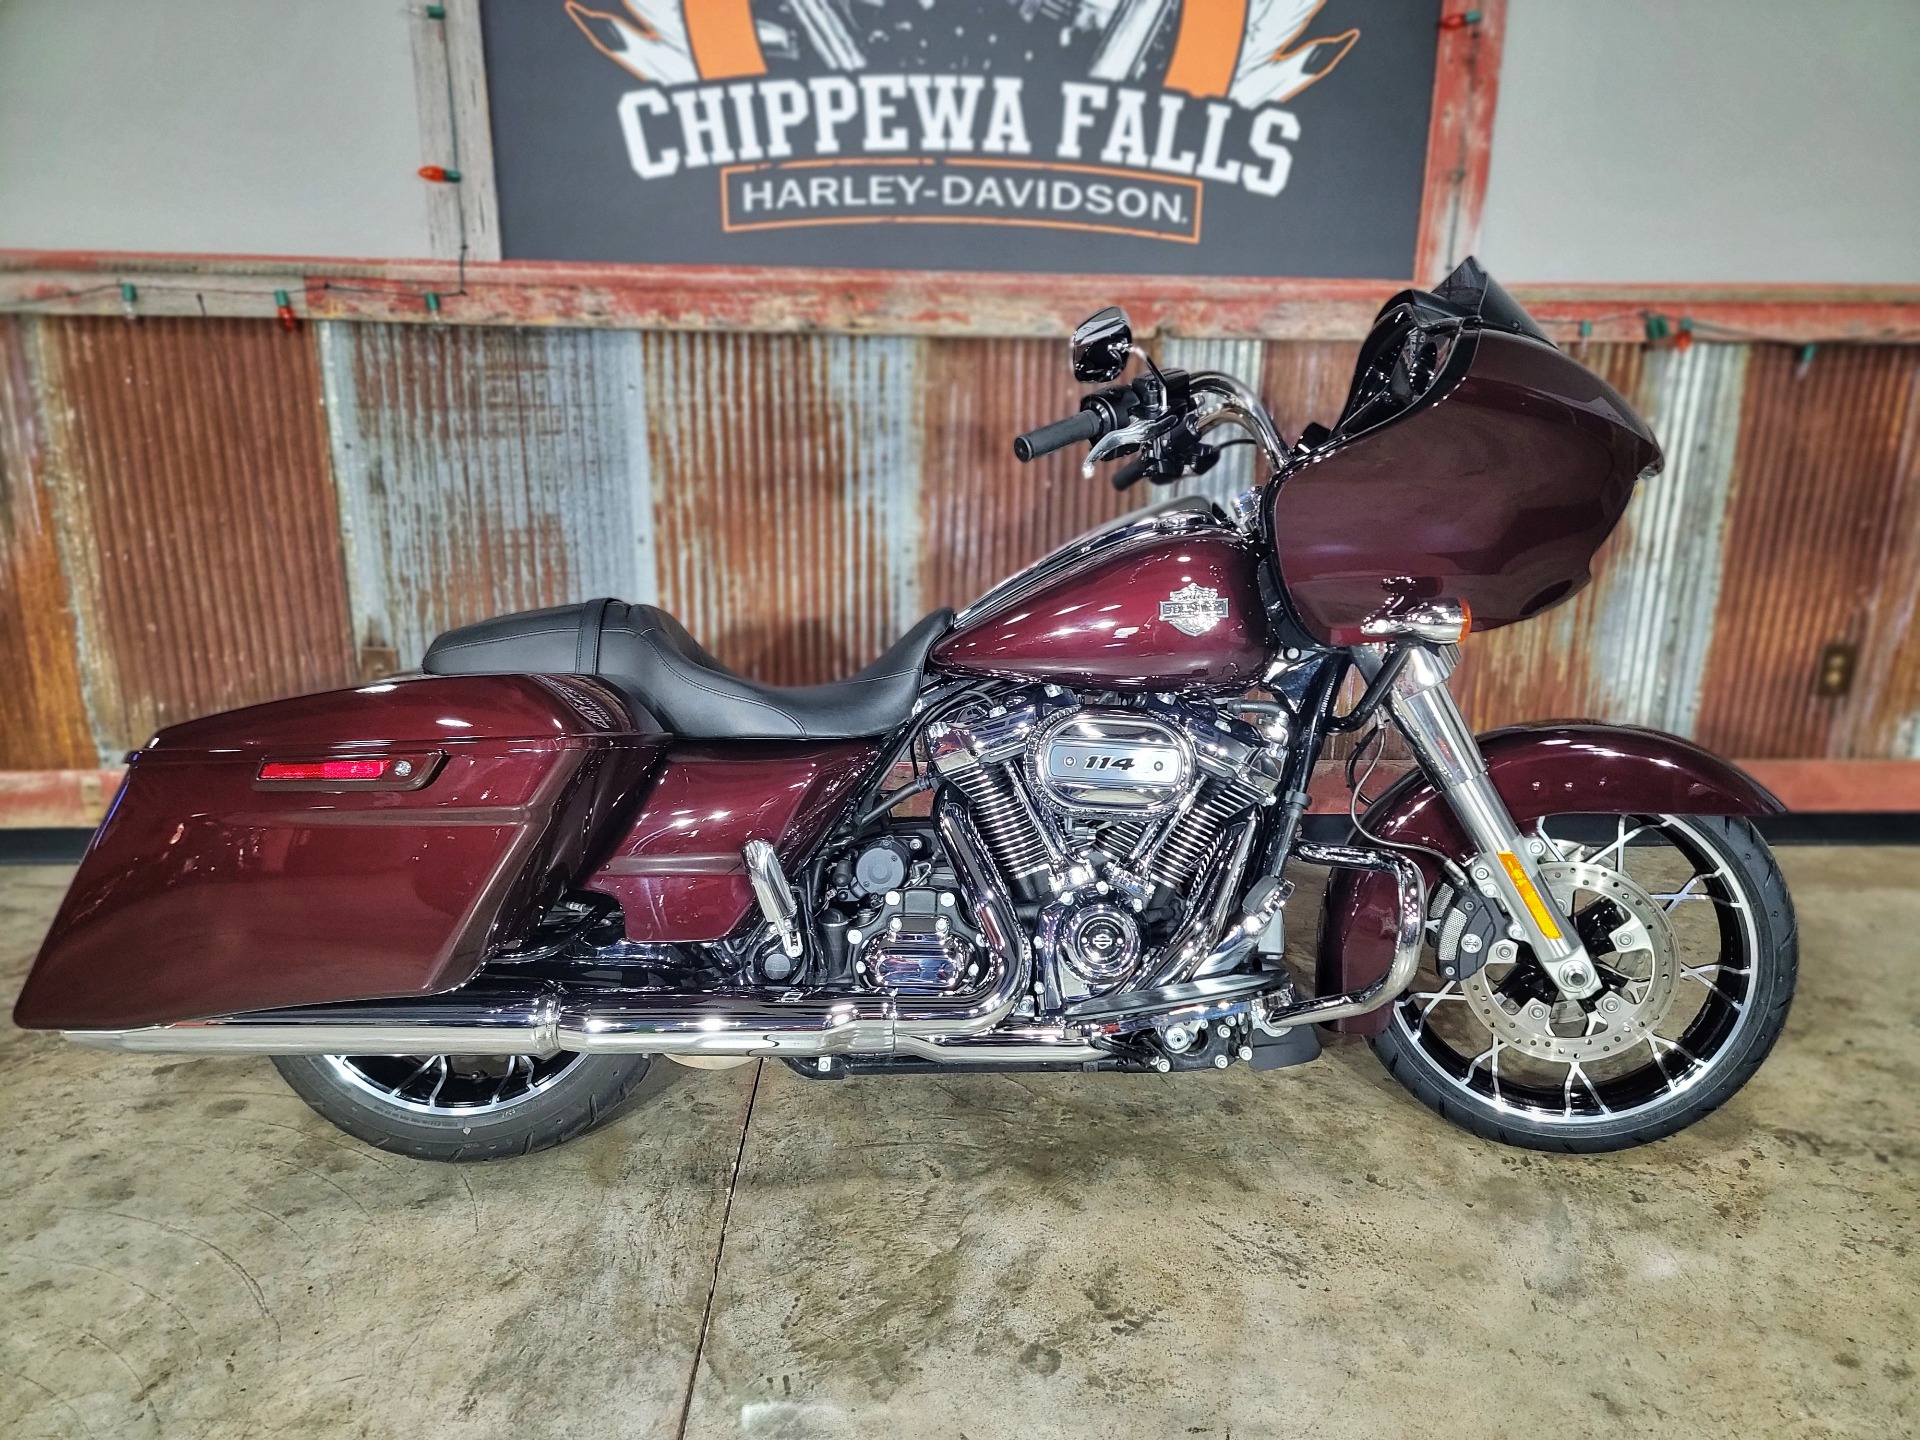 2021 Harley-Davidson Road Glide® Special in Chippewa Falls, Wisconsin - Photo 1